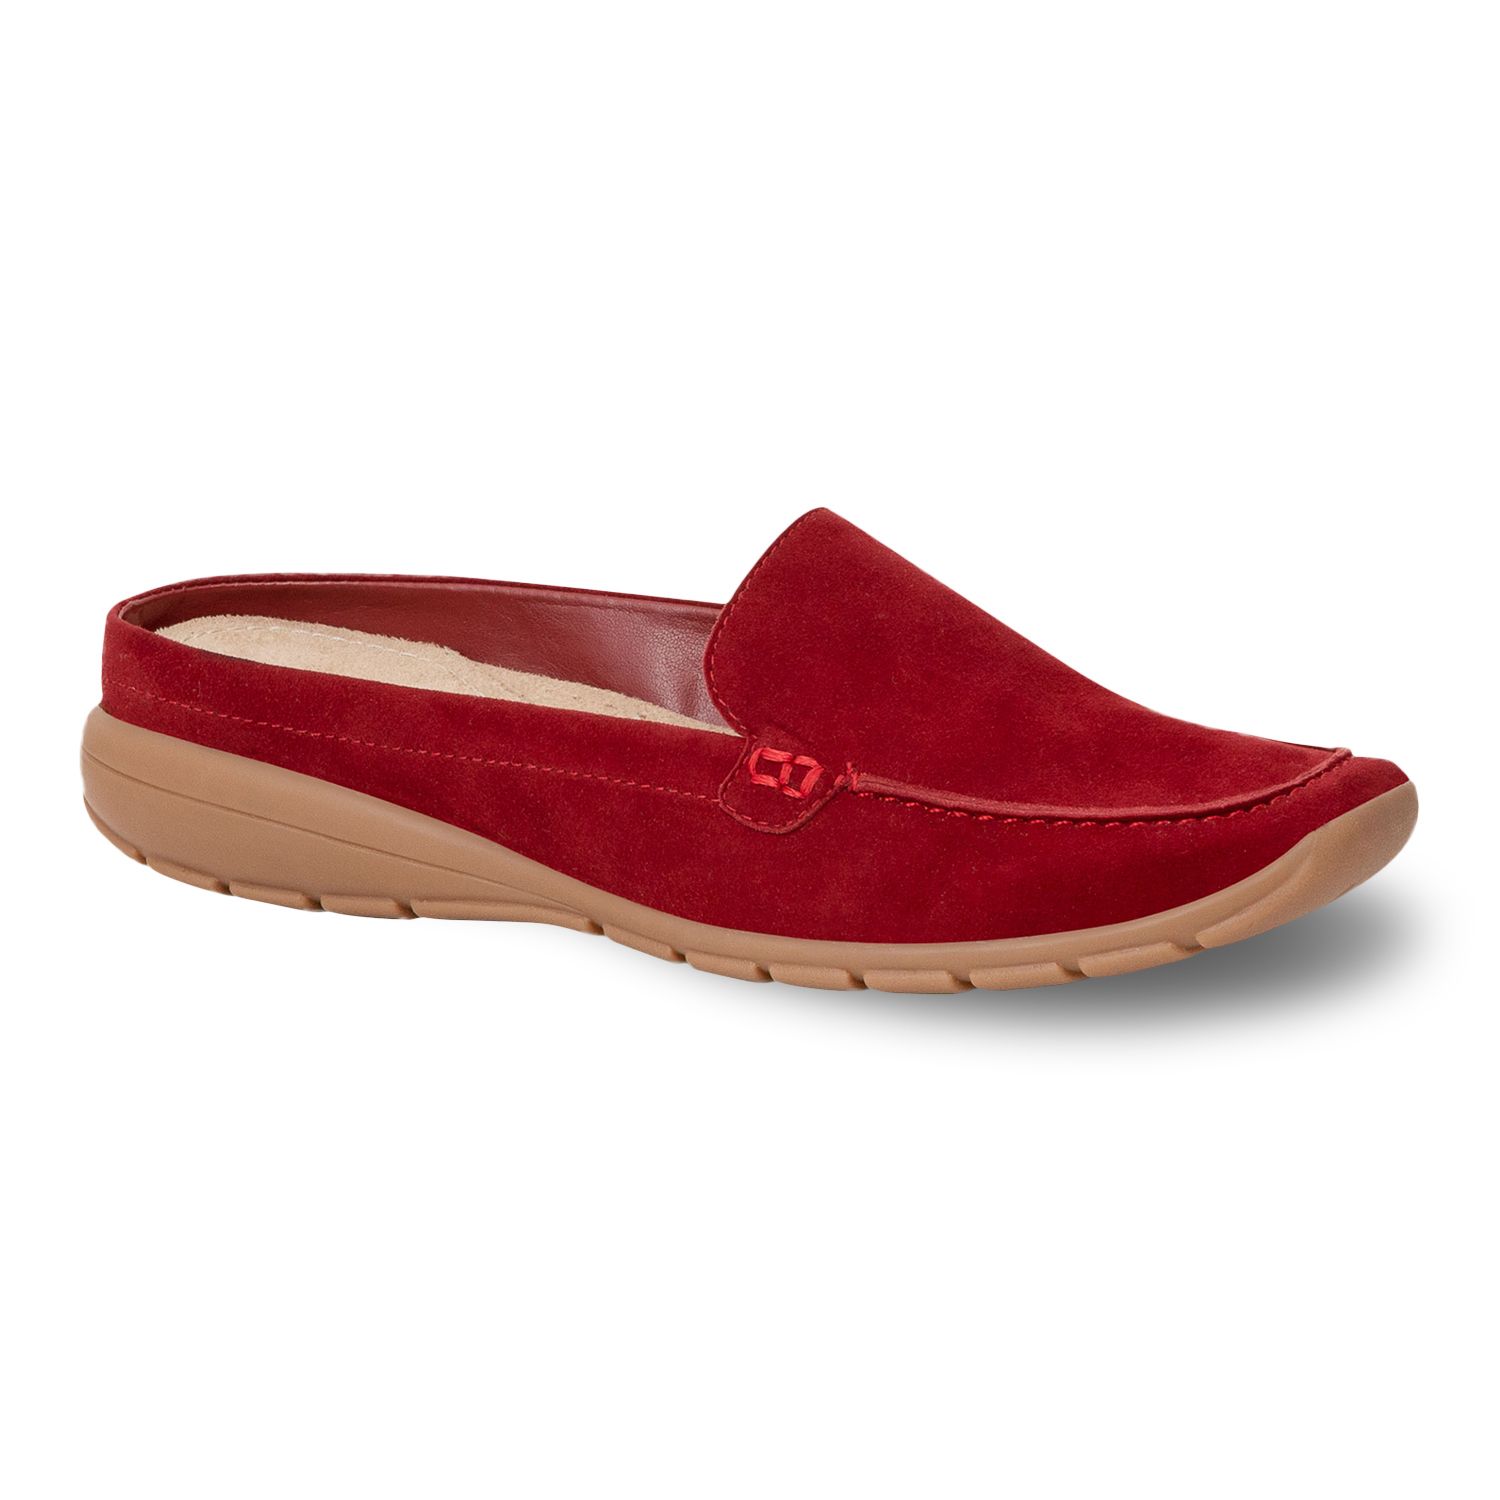 Image for Easy Spirit Aggie Women's Suede Mules at Kohl's.